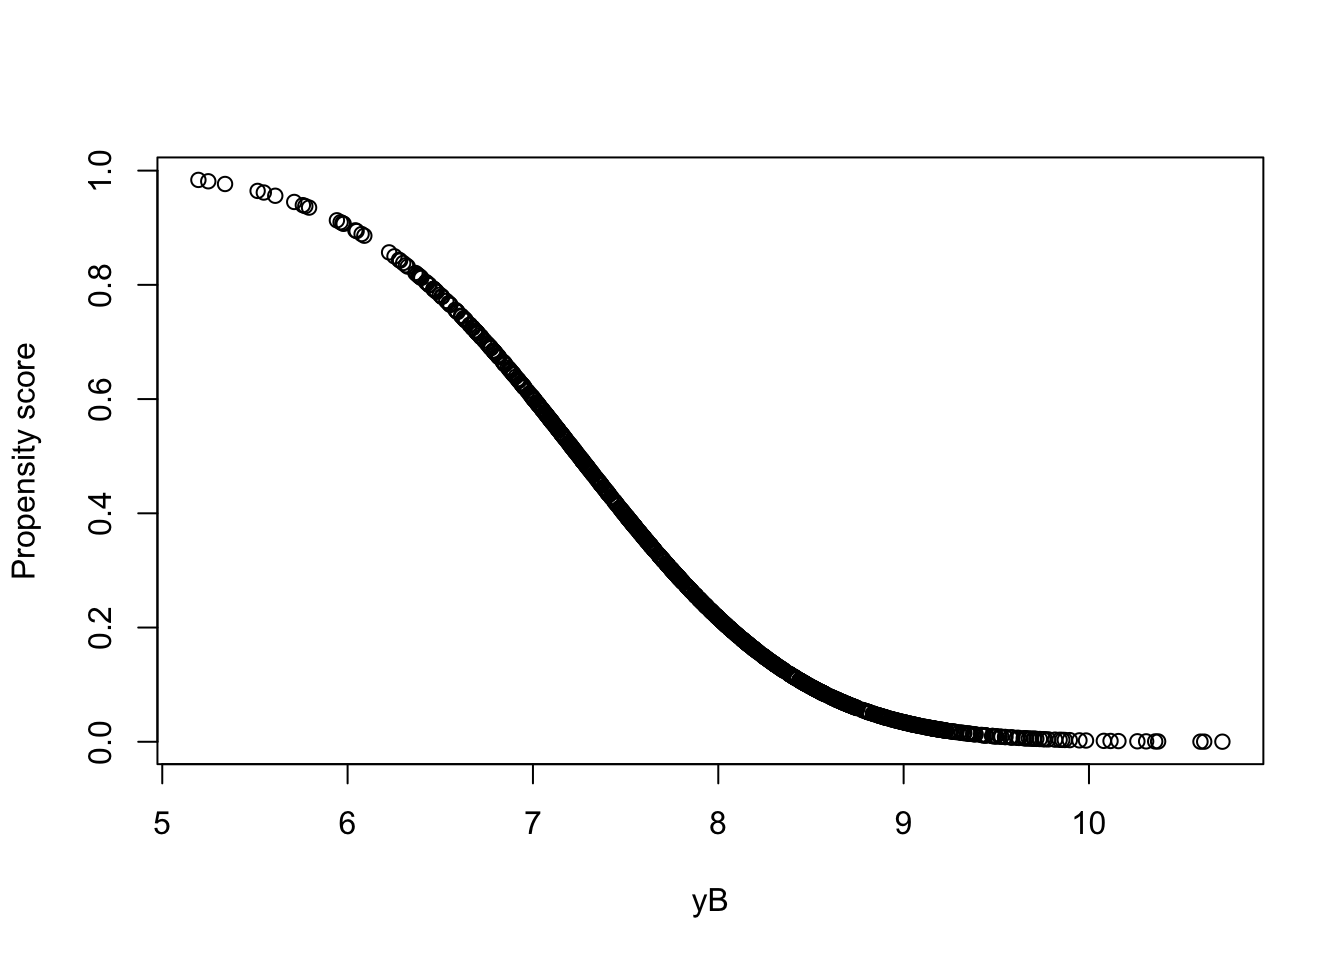 Propensity score as a function of $y_i^B$